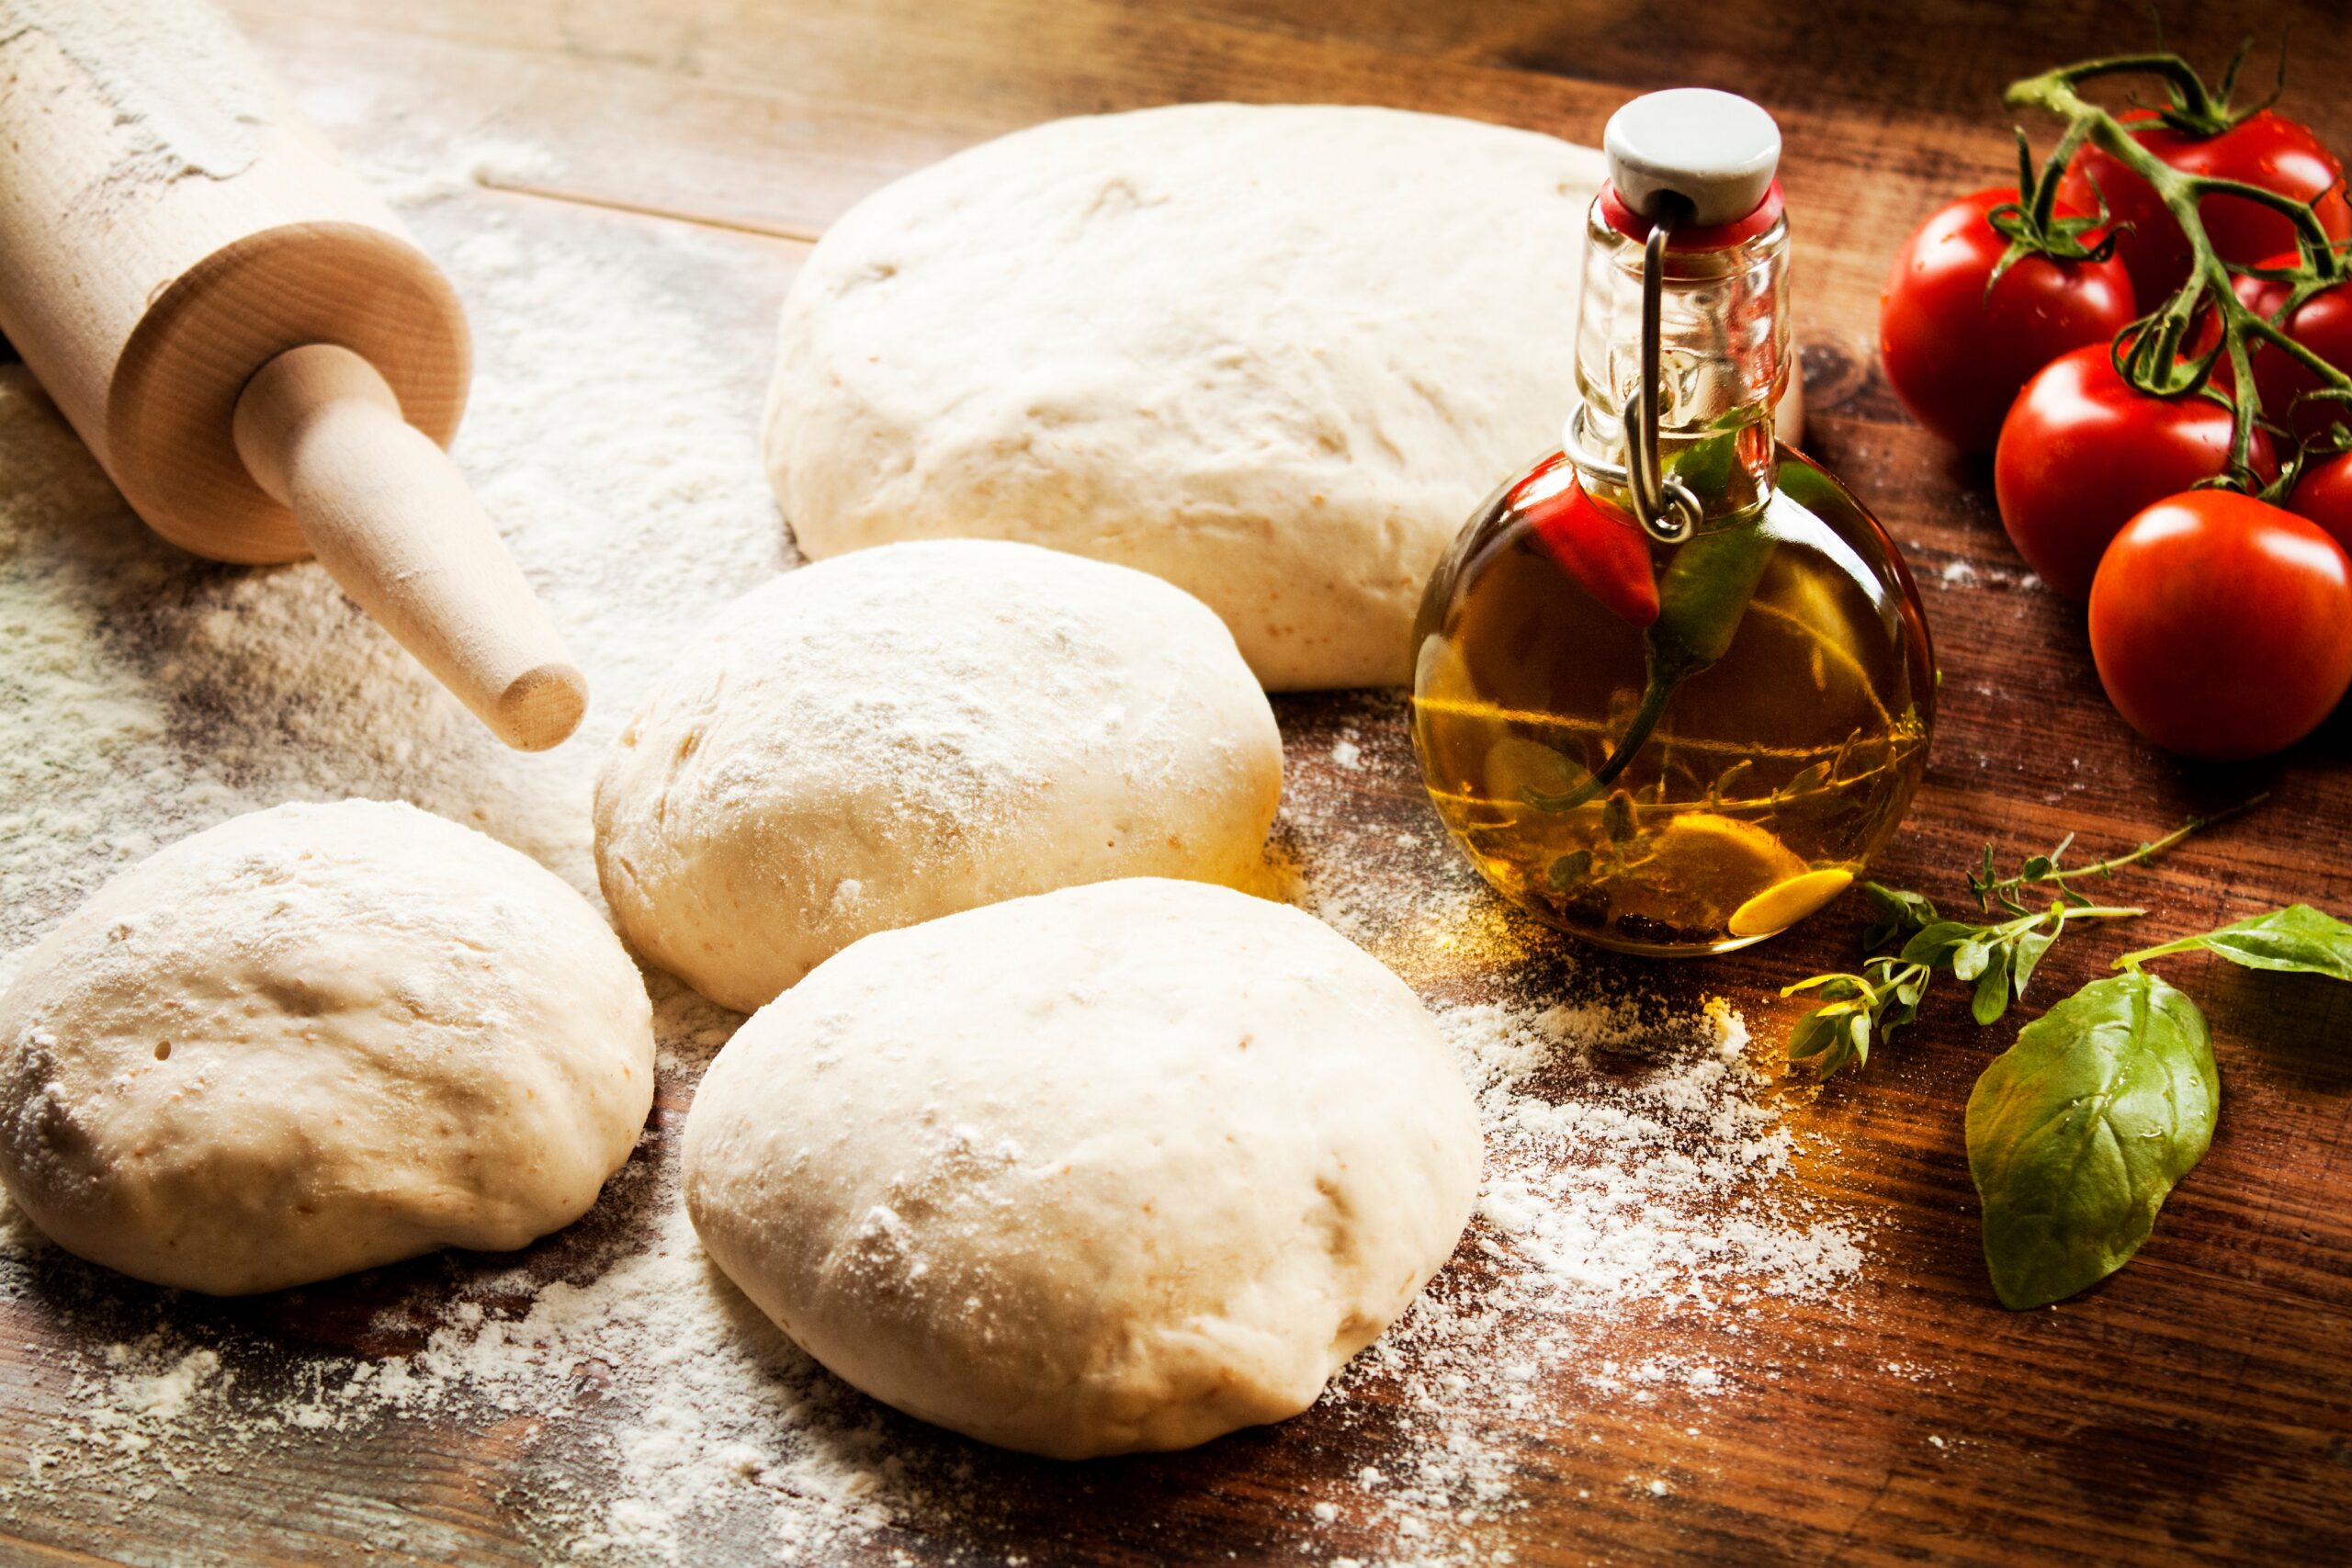 How to Make Perfect Pizza Dough for Your Pizza Oven